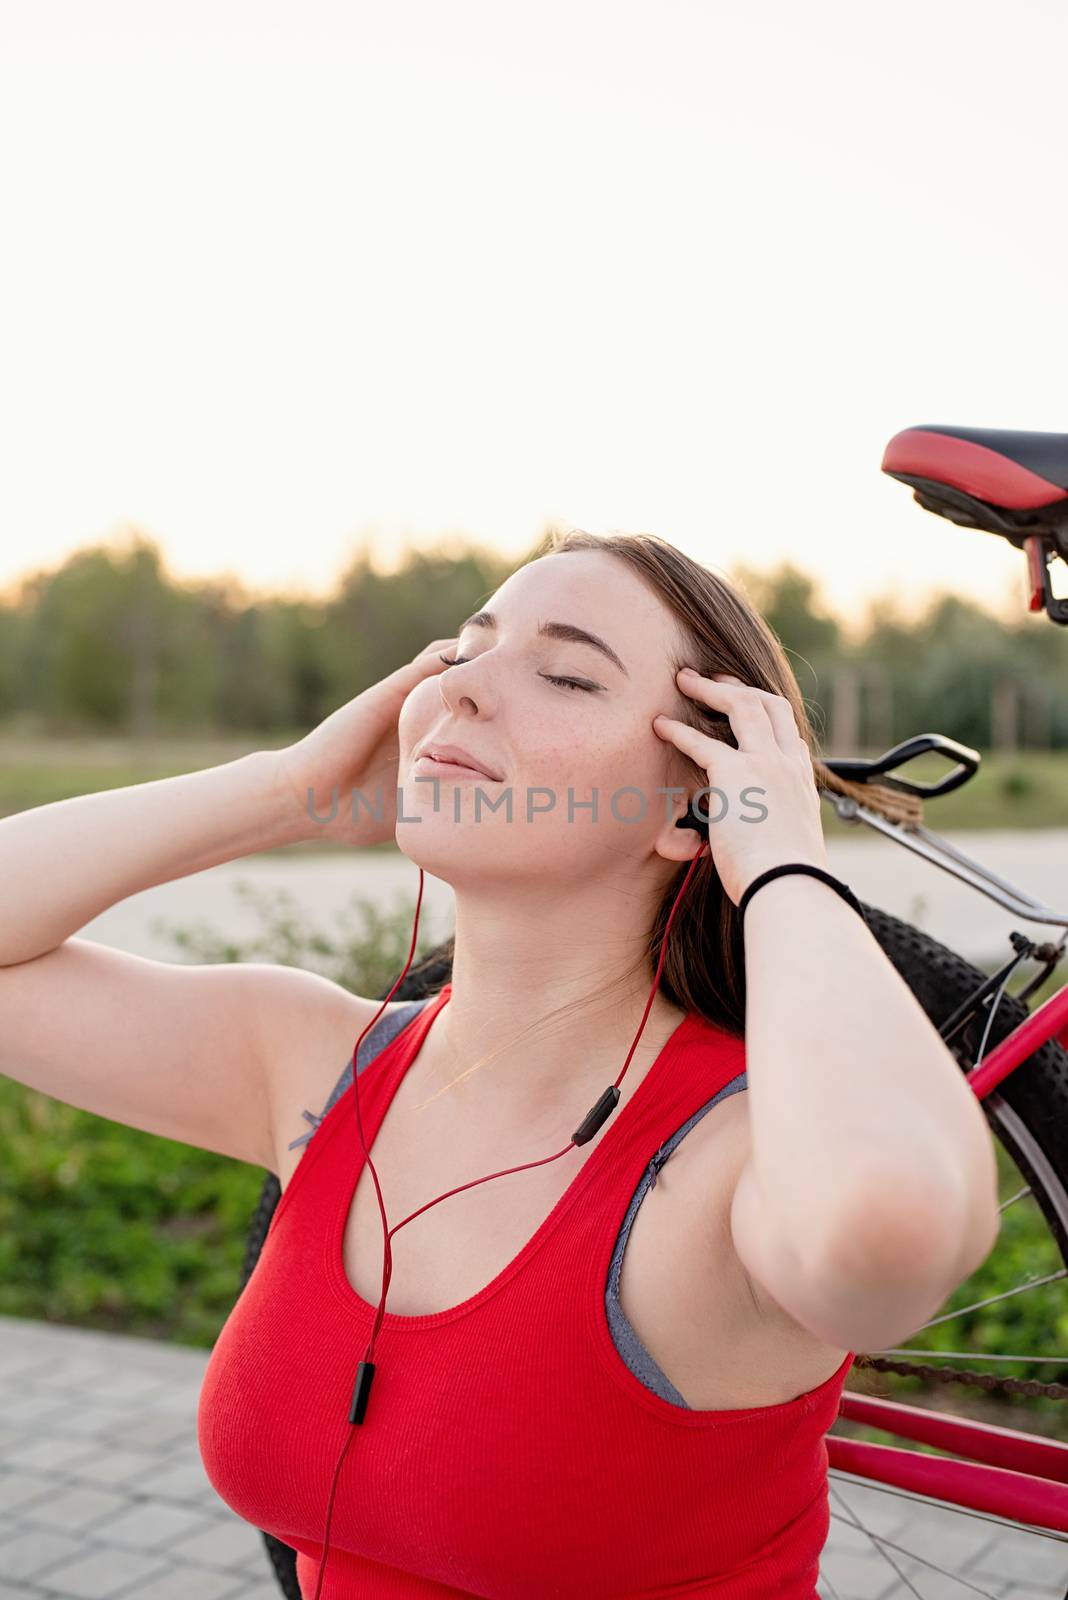 Teenage girl sitting next to her bike listening to the music in the park